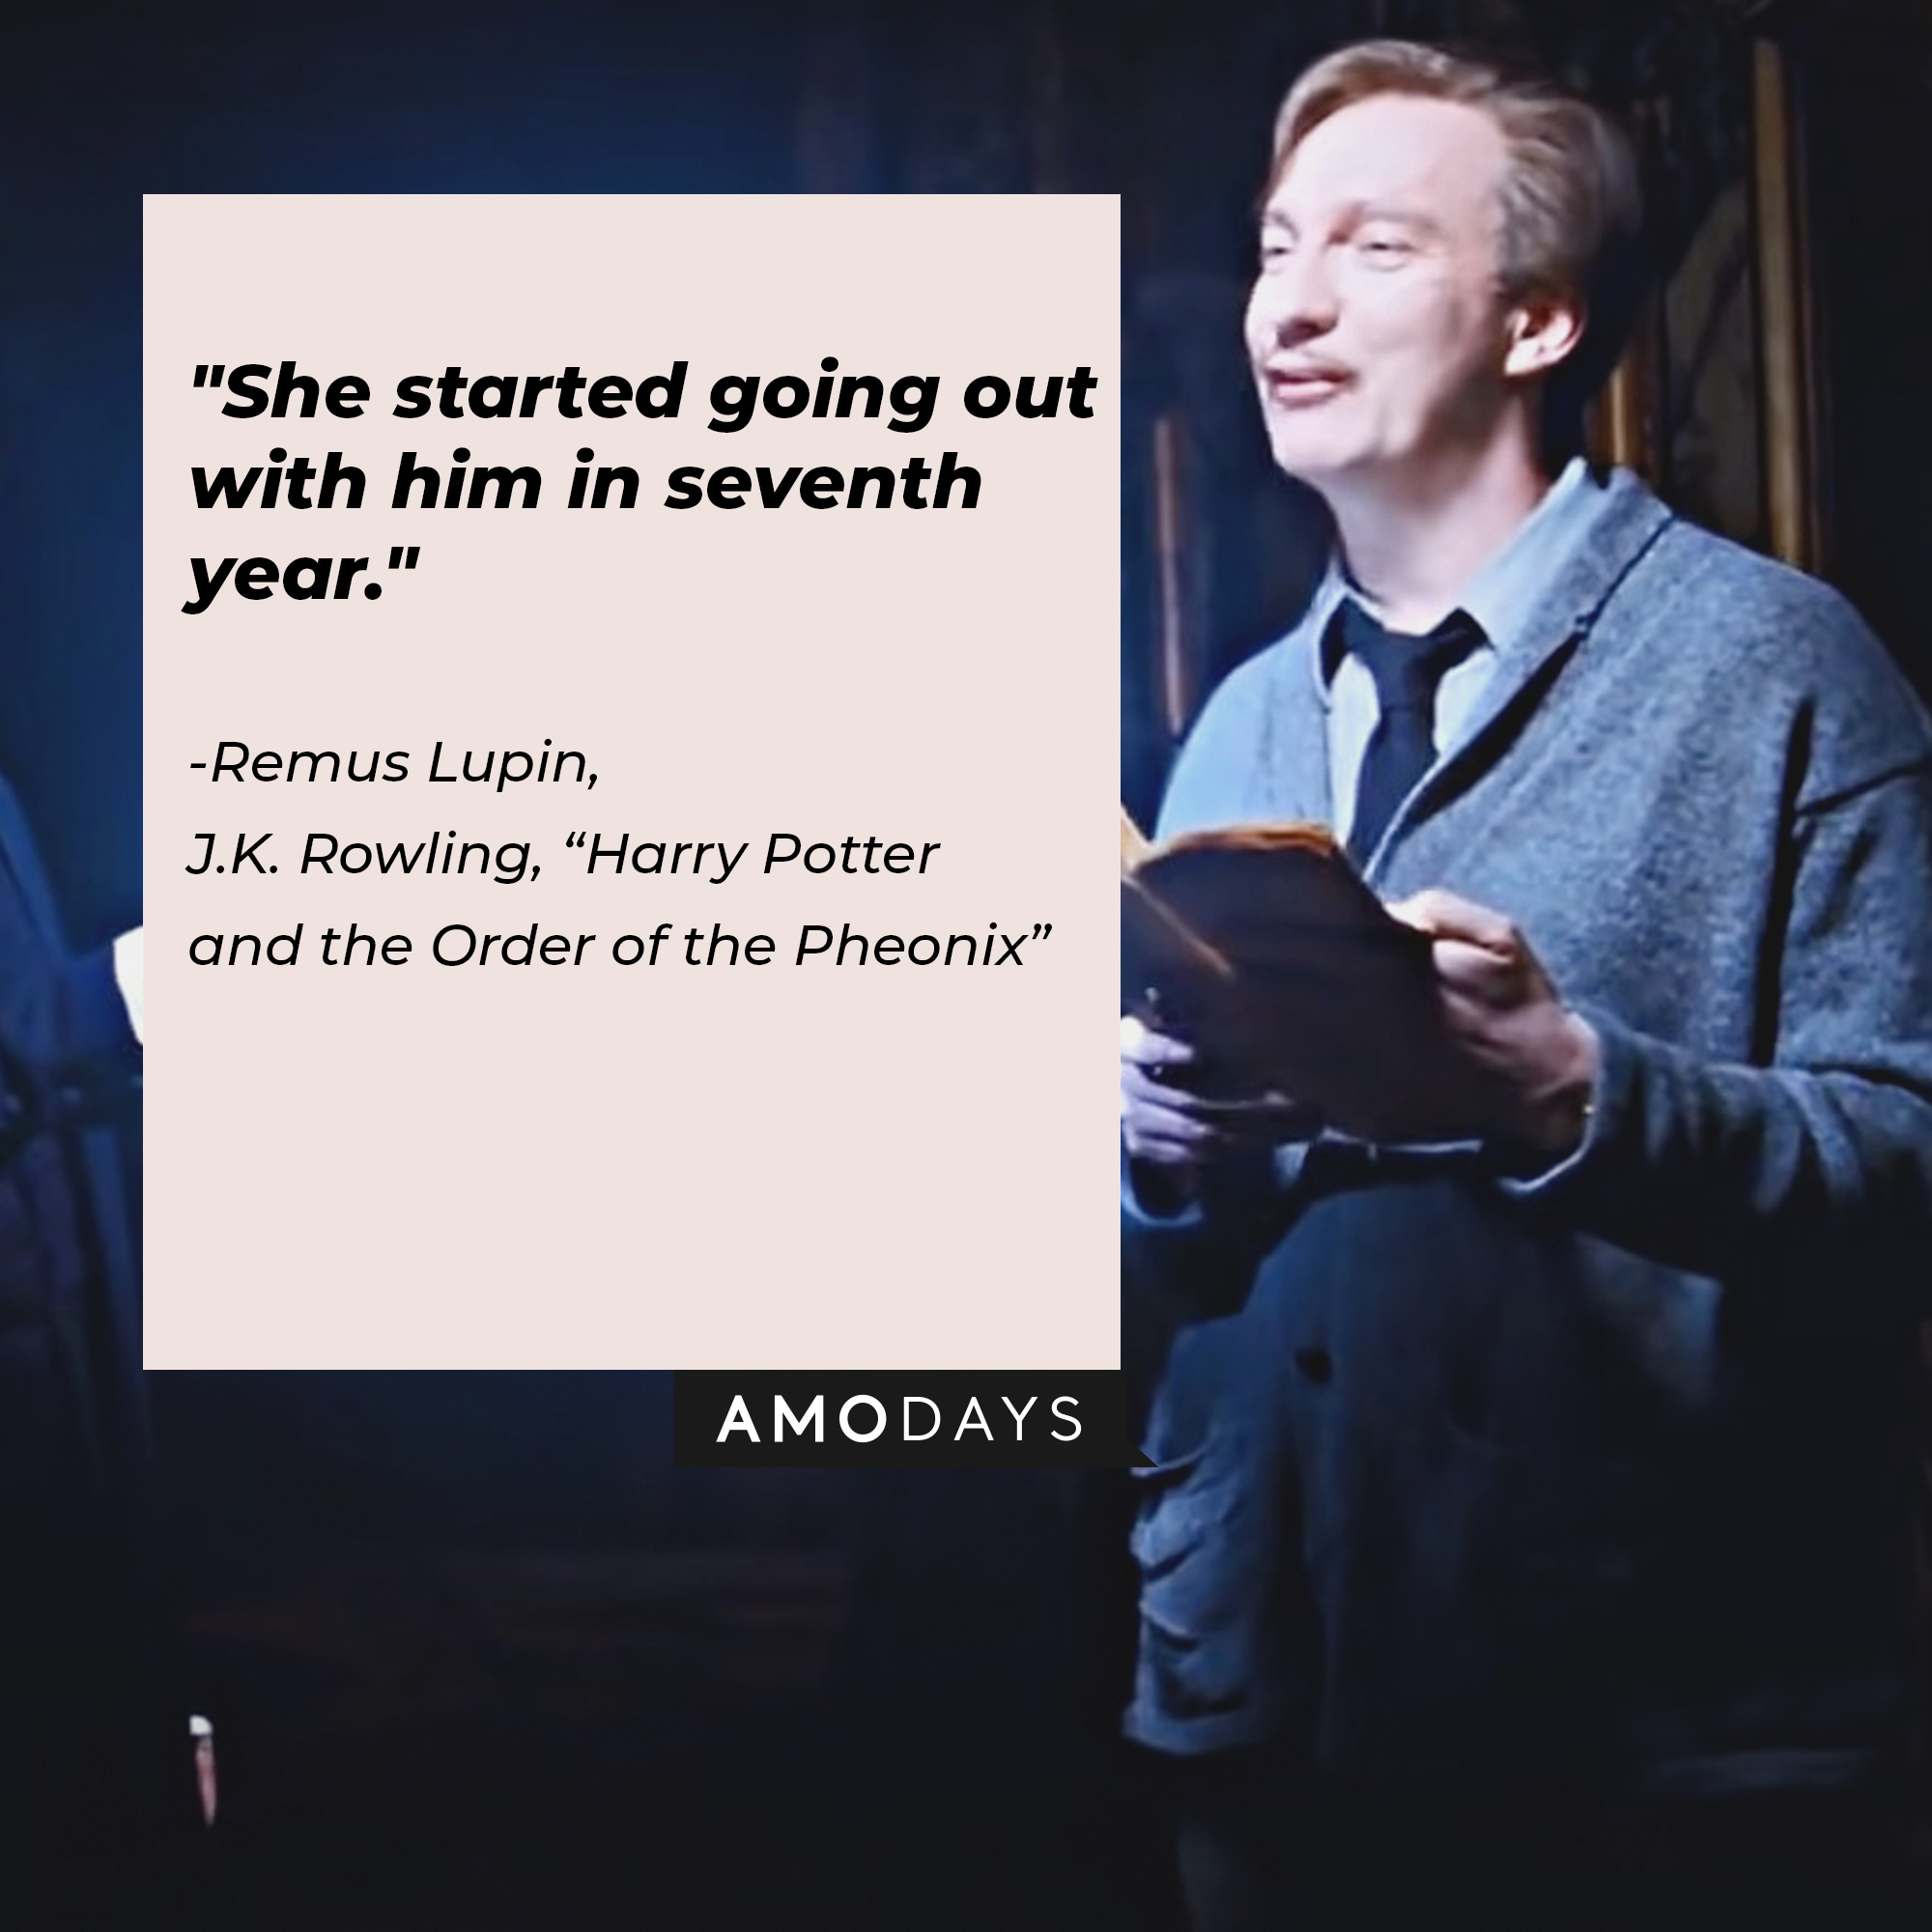 A picture of Remus Lupin with his quote:"She started going out with him in seventh year." | Source: youtube.com/WarnerBrosPictures